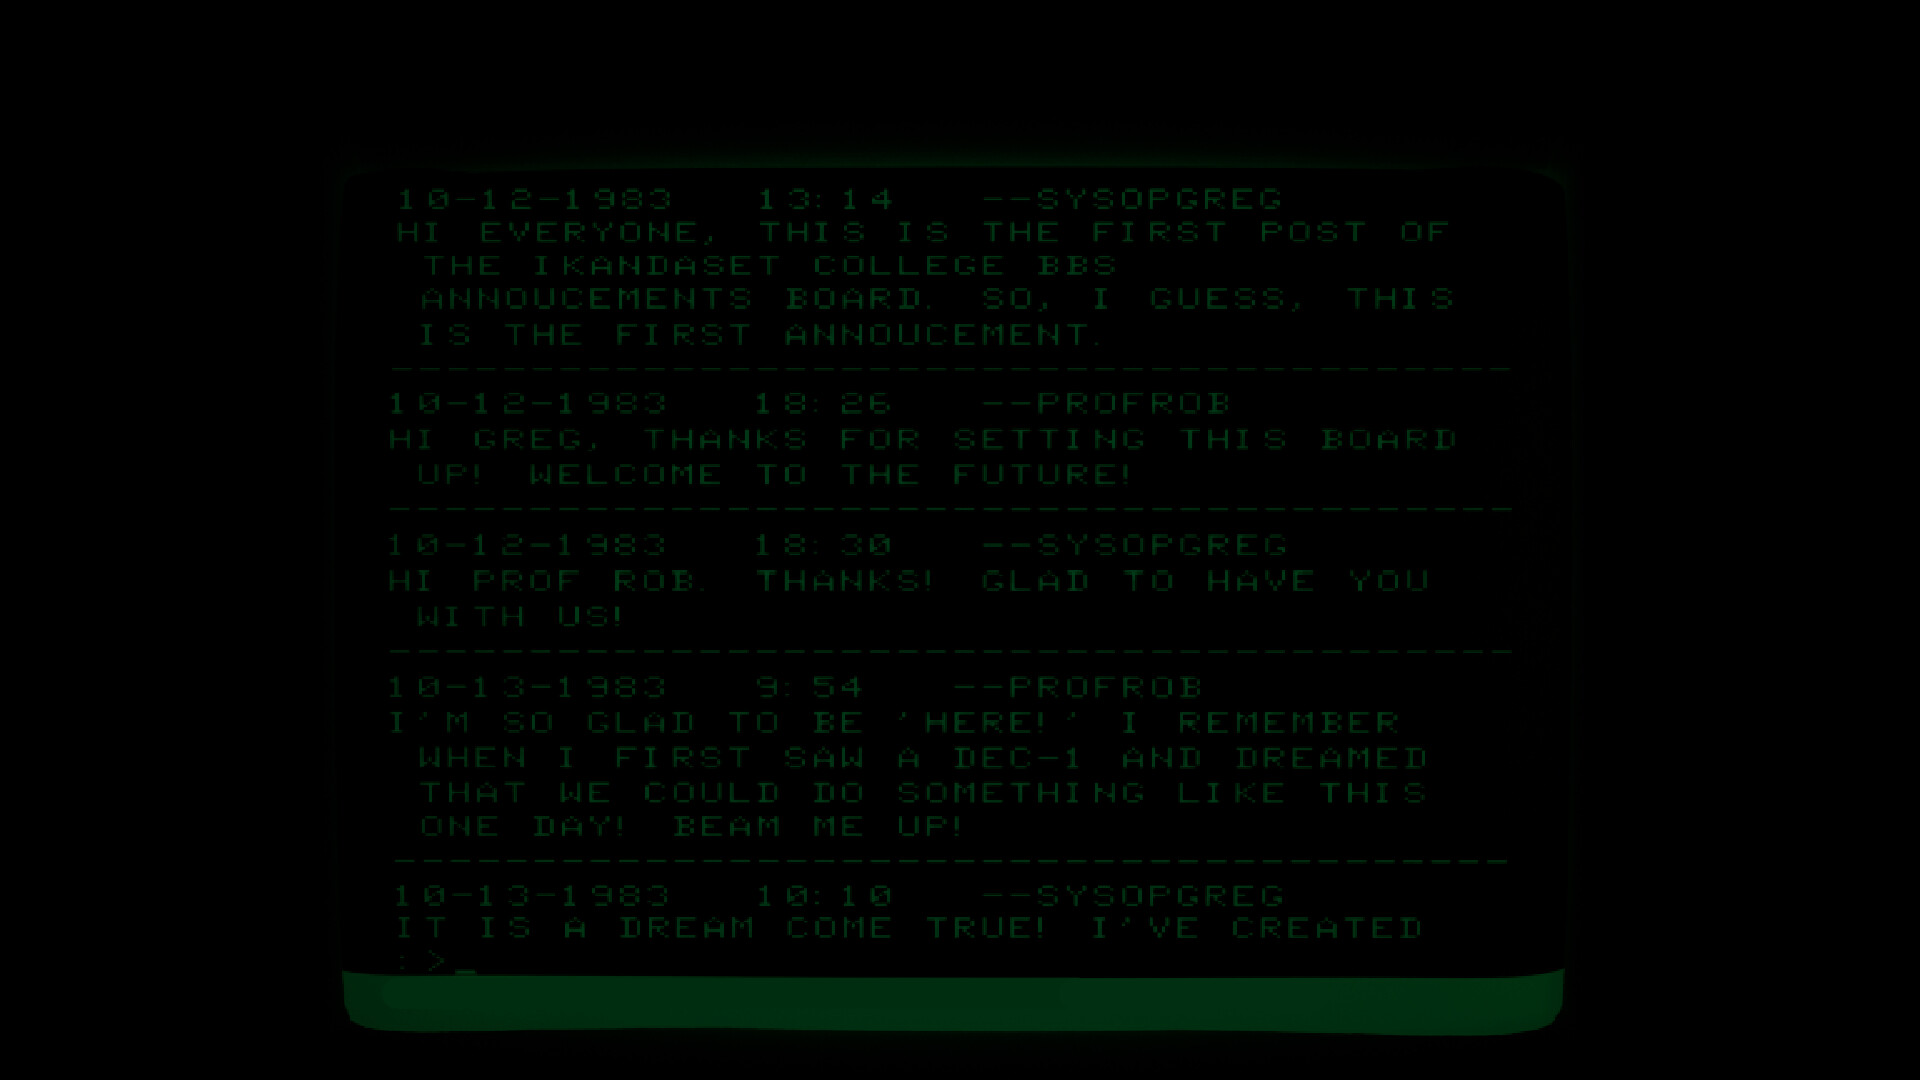 A retro computer screen showing entries in one of the boards on the Ikandaset College BBS